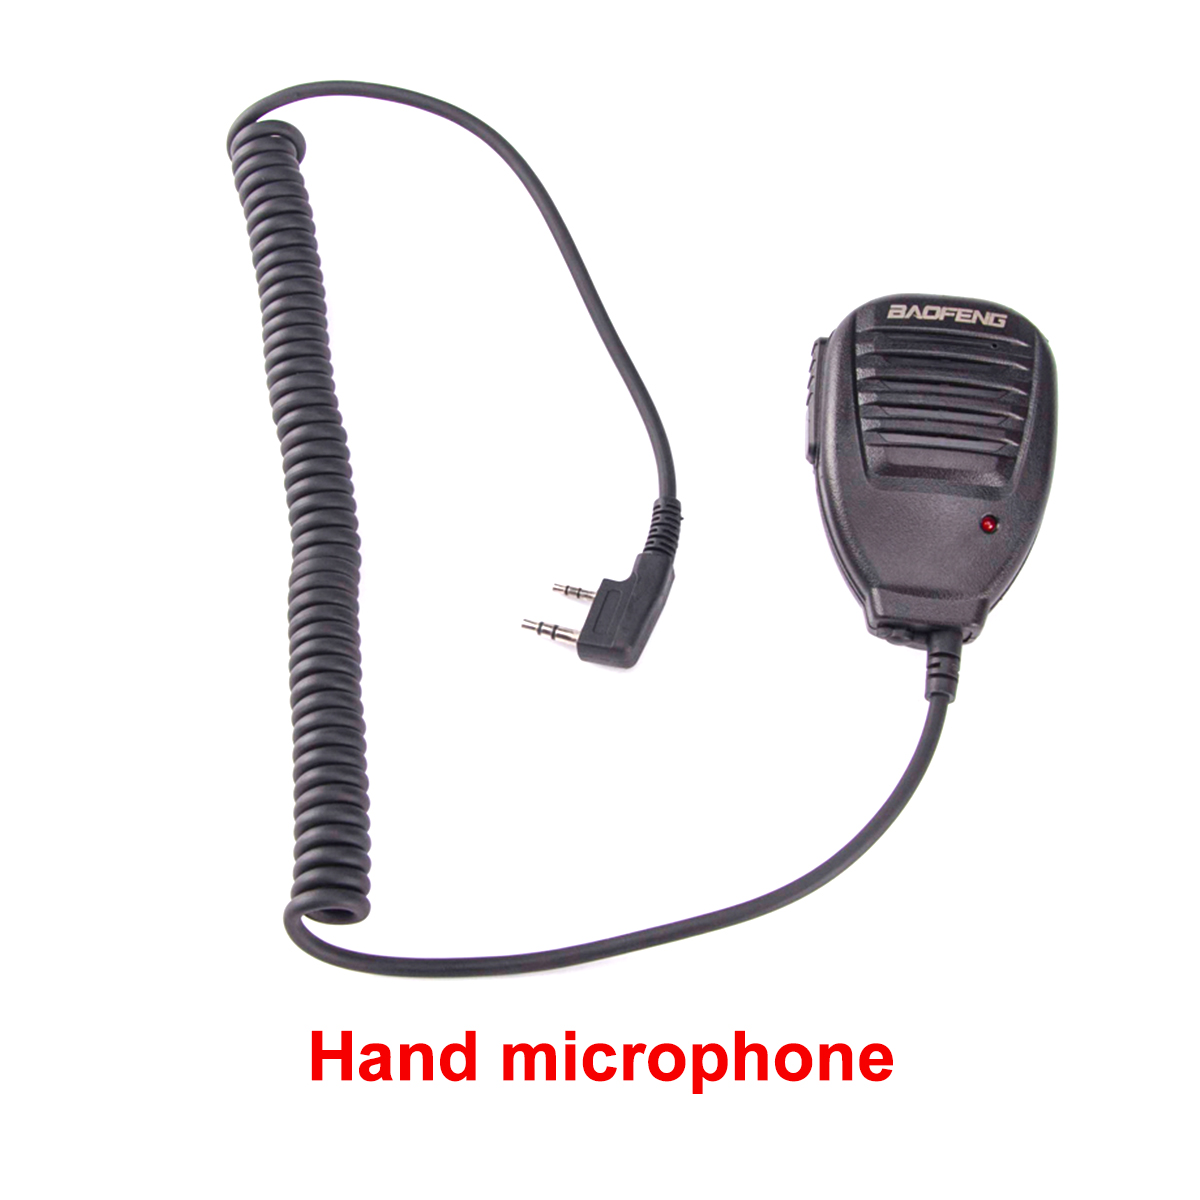 Walkie-Talkie-Accessories-Write-Frequency-Line-Headphones-USB-Car-Charger-Hand-Microphone-Two-Way-Ra-1837282-5